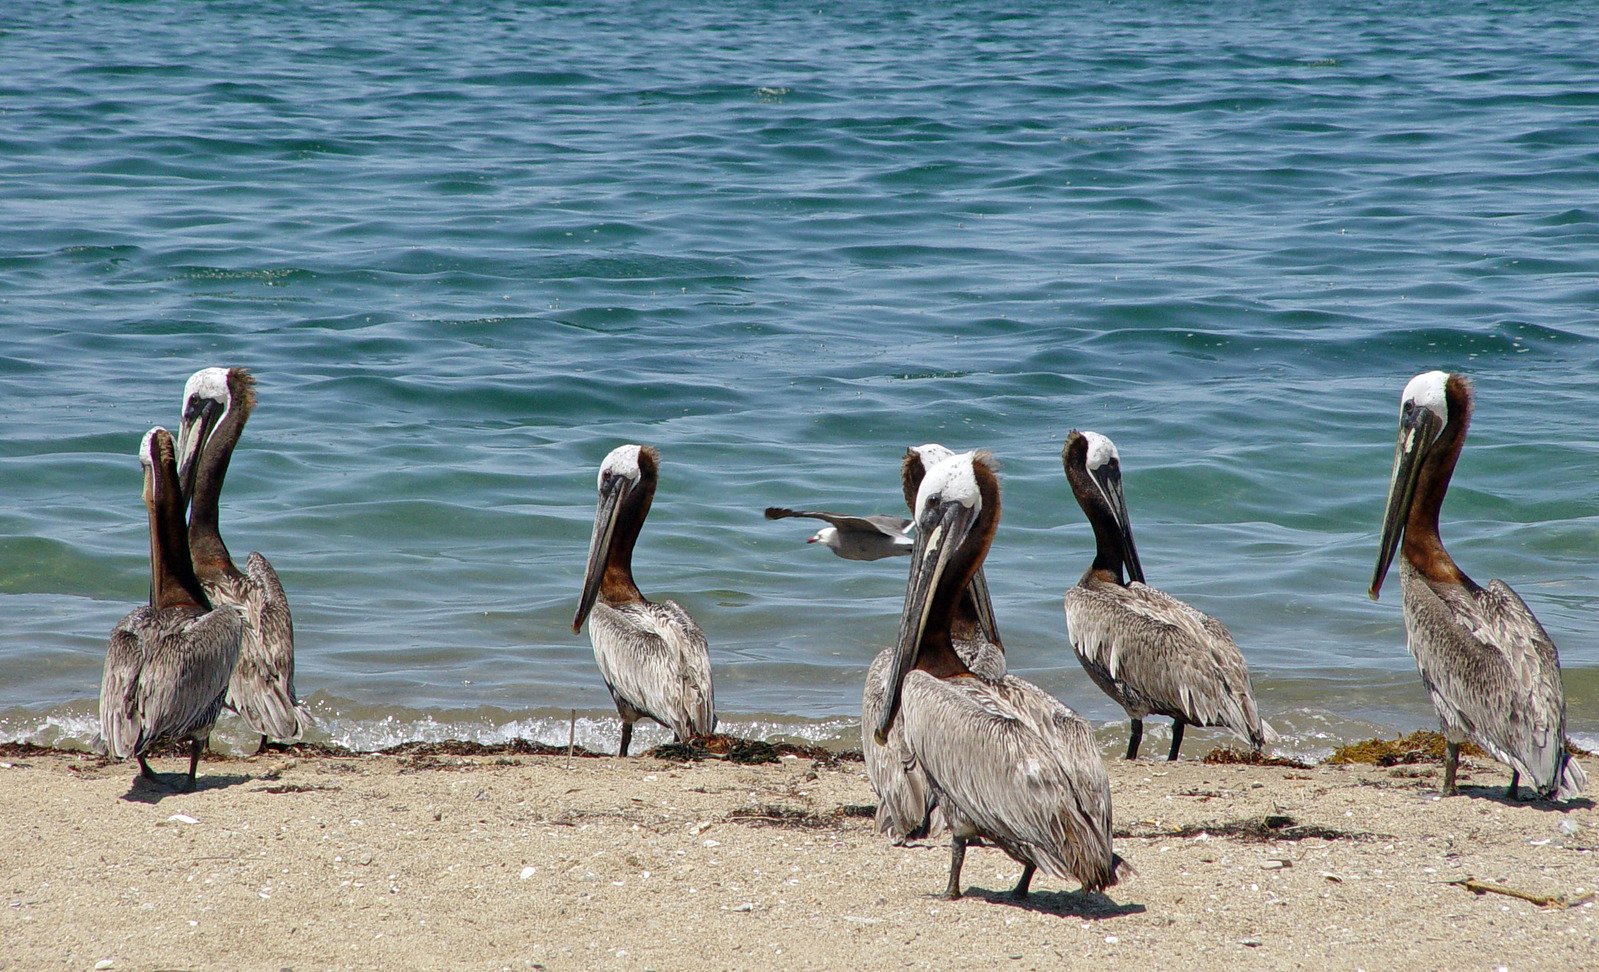 a flock of pelicans looking out over the water